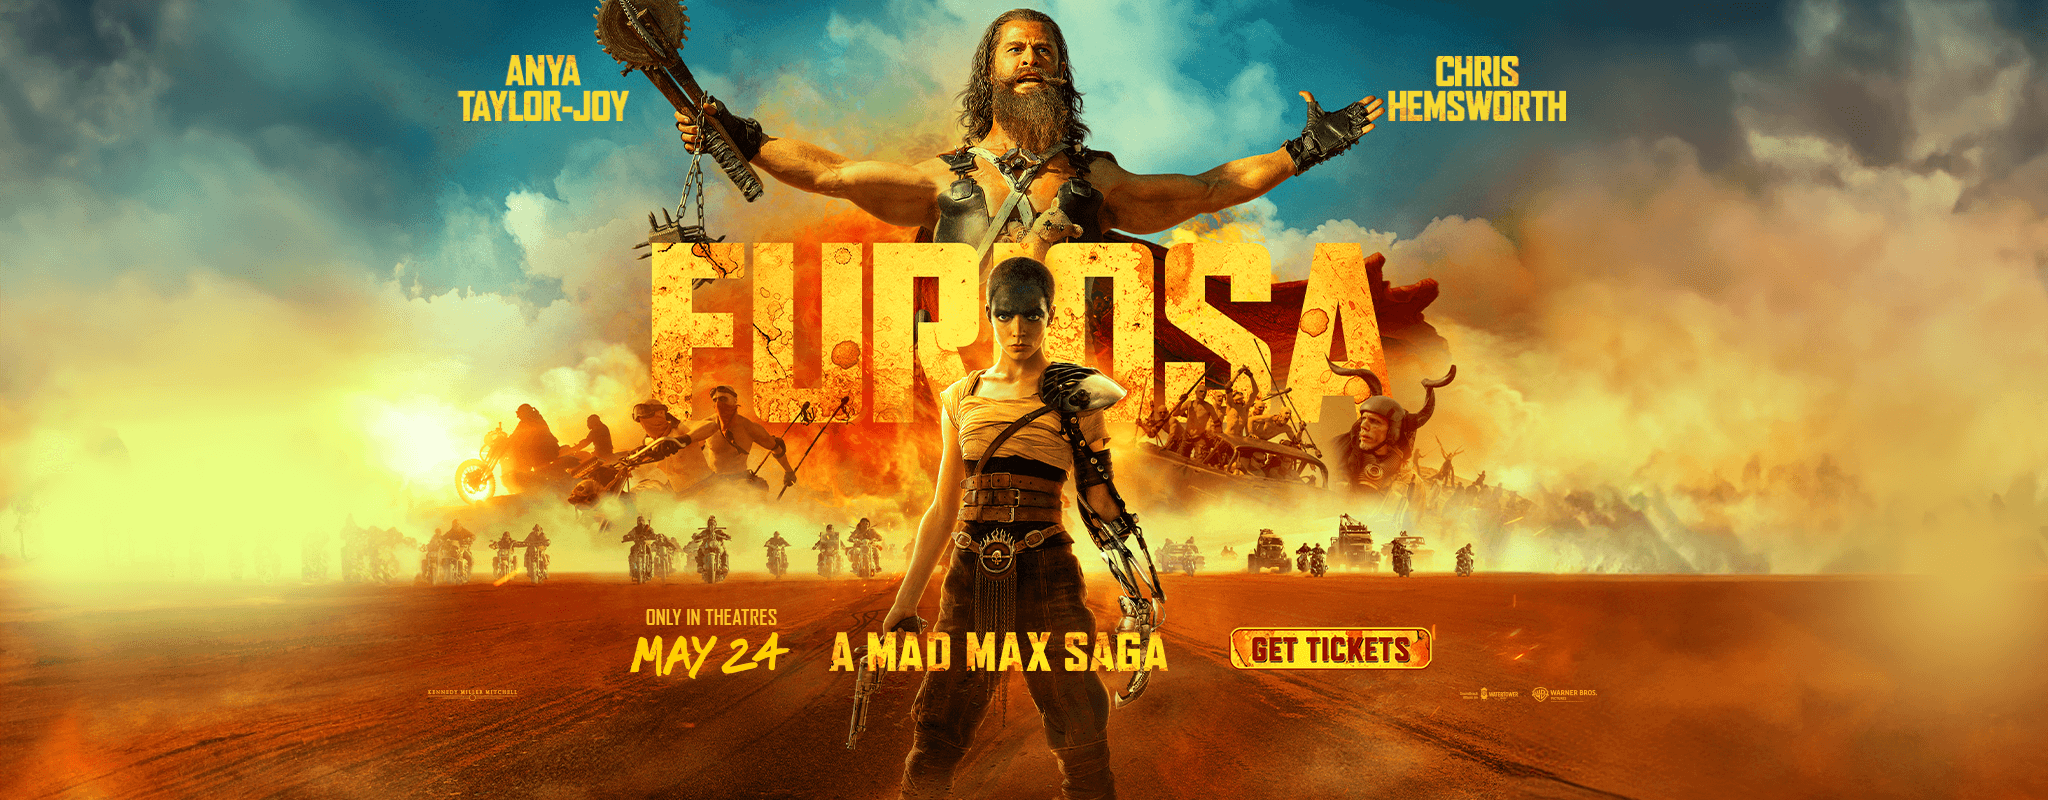 Furiosa, a mad max saga. Only in theatres May 24. Get tickets